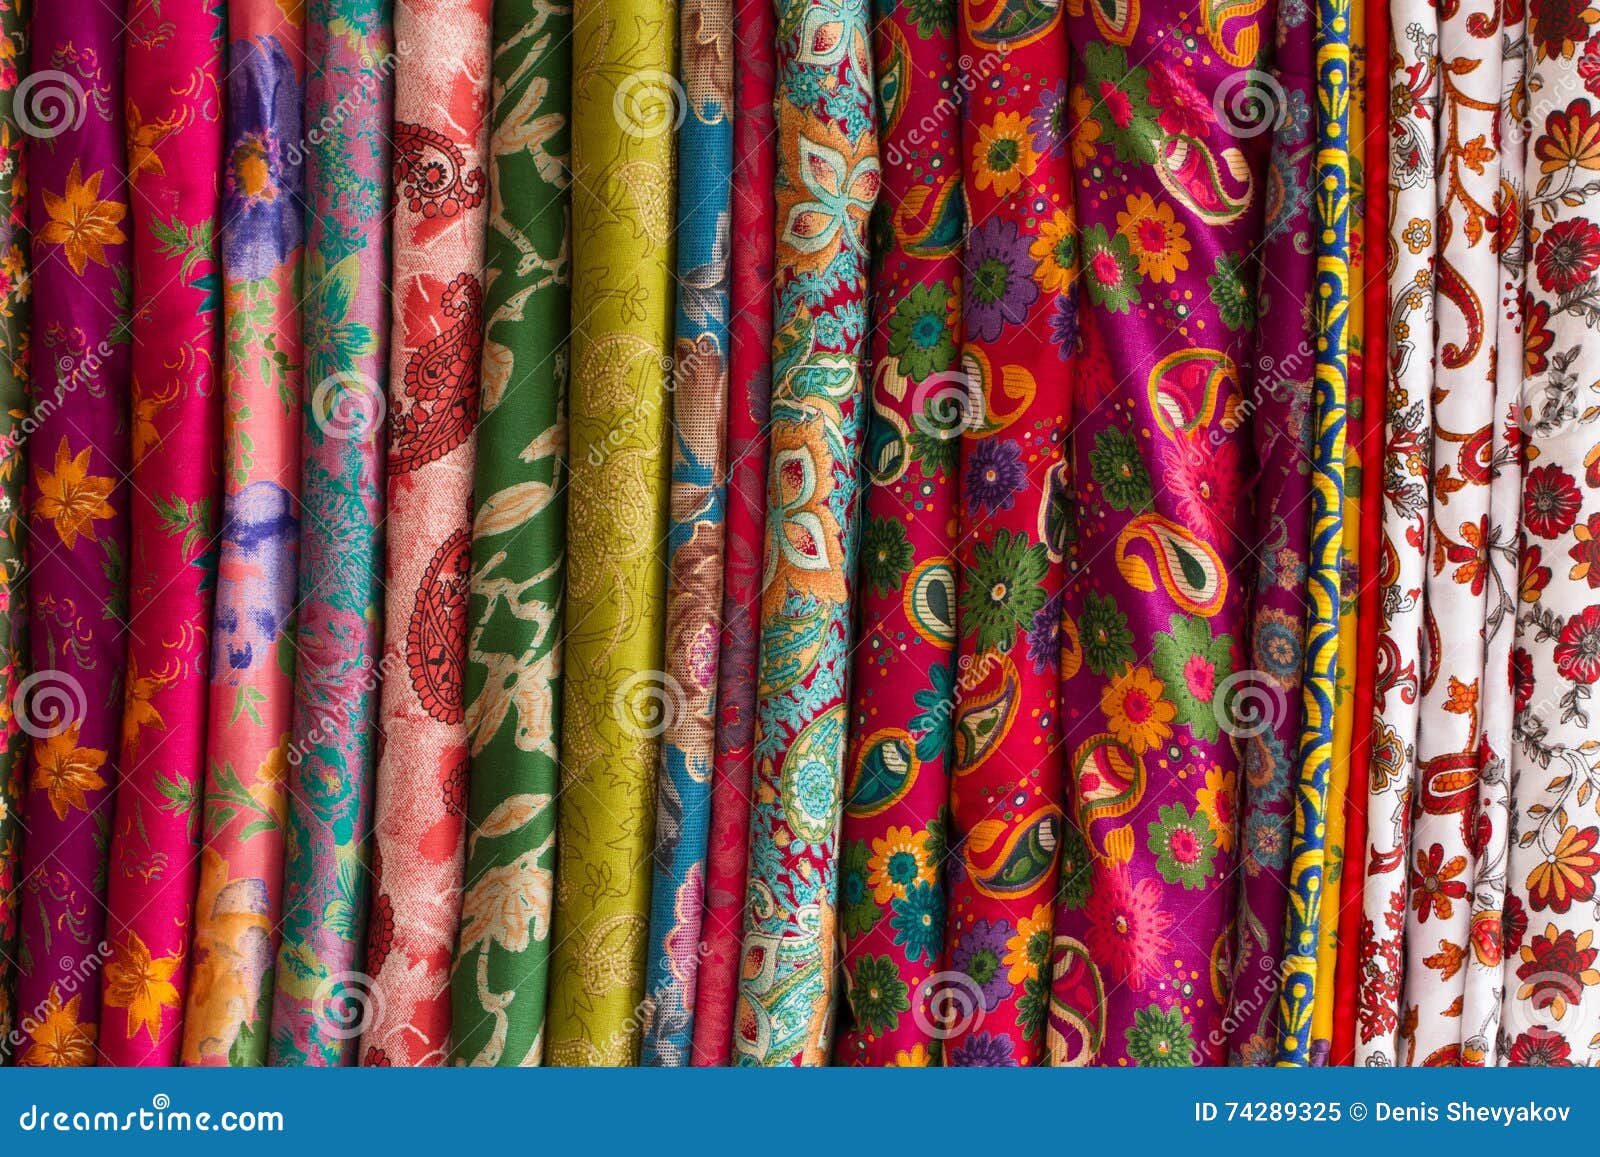 Colored fabric stock image. Image of colored, bright - 74289325